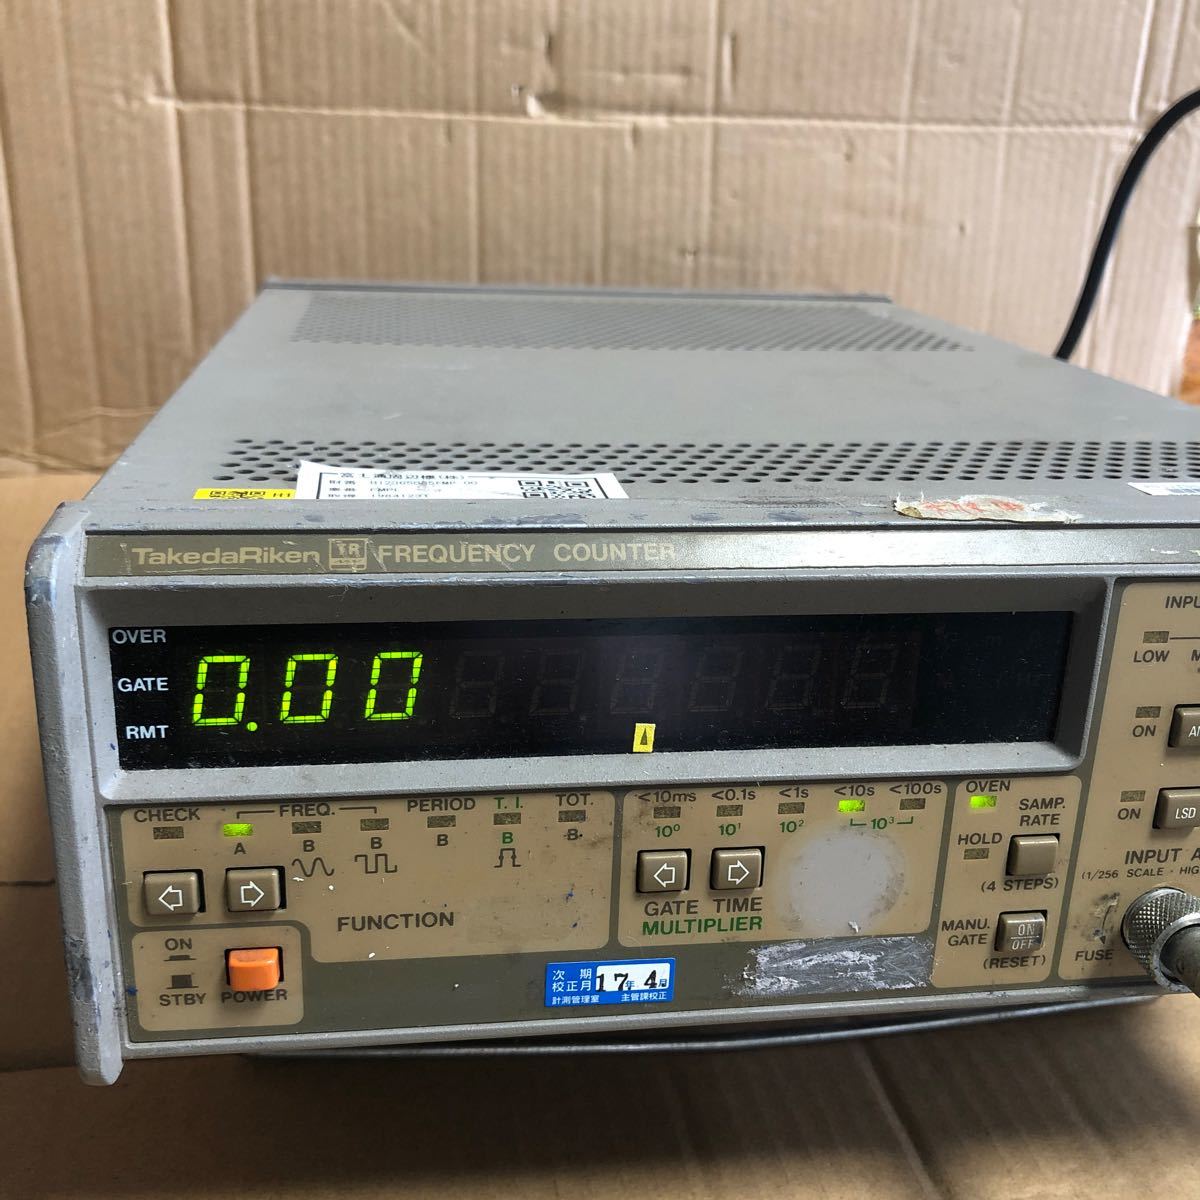 (7-2)ADVANTEST アドバンテスト FREQUENCY COUNTER 周波数カウンター TR5825A